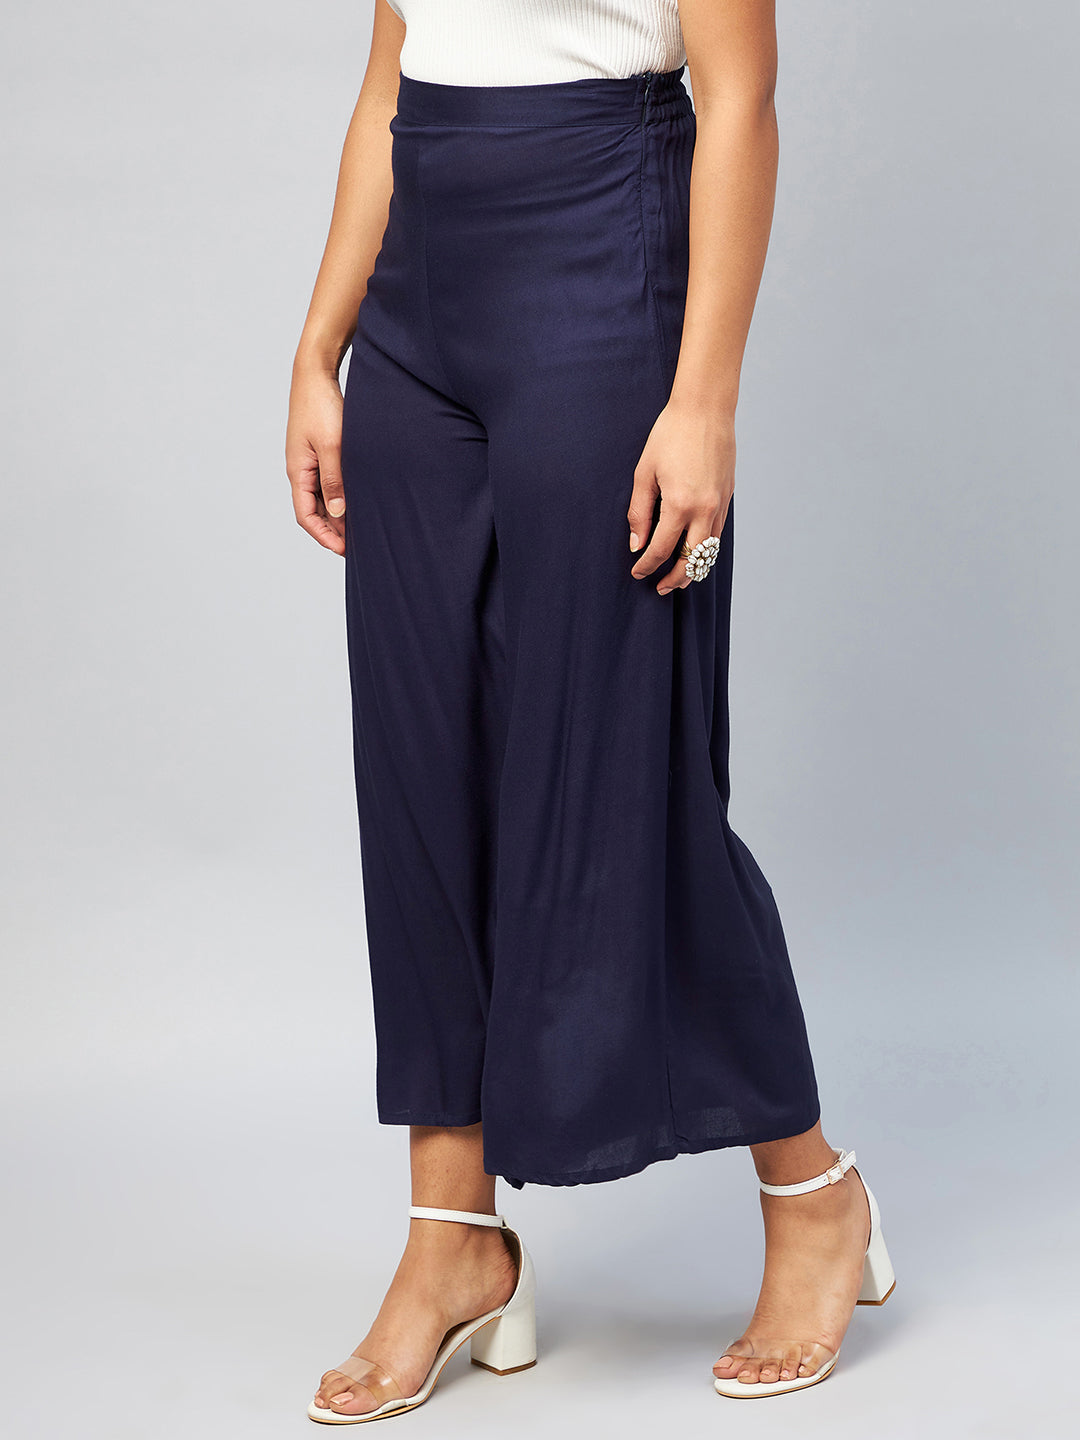 Navy Blue Solid Palazzos